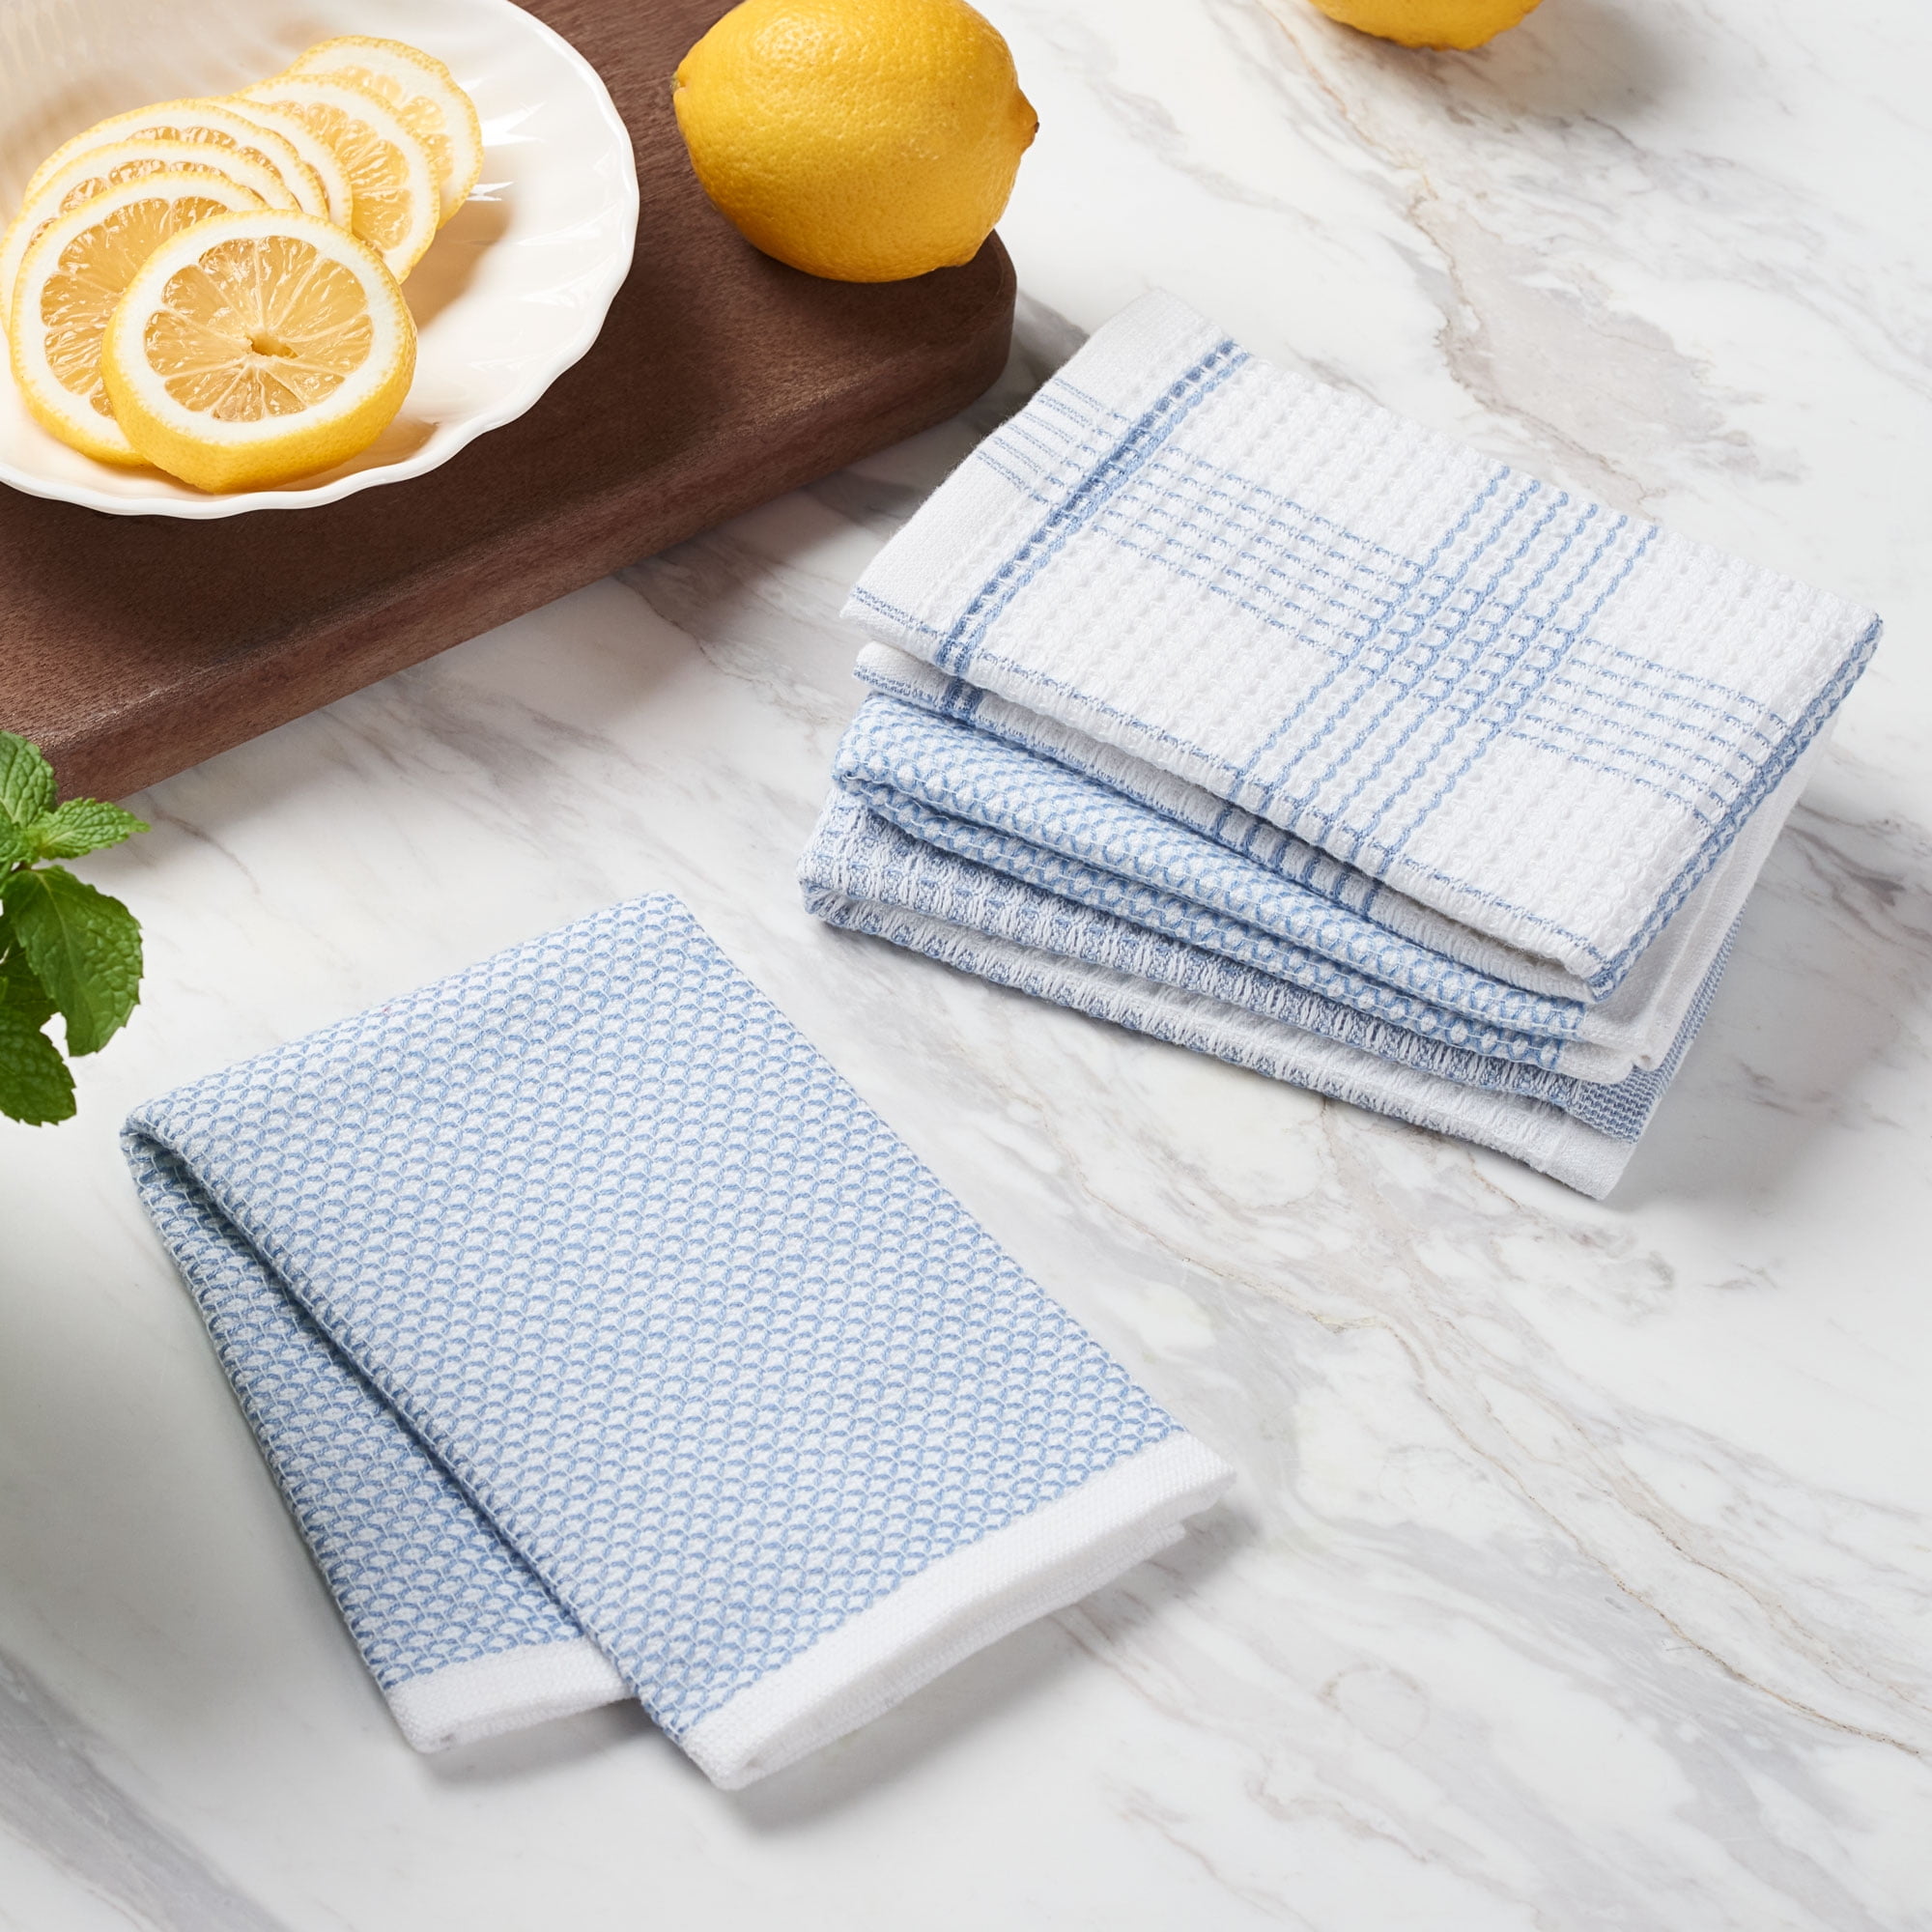 LANE LINEN Kitchen Towels Set - Pack of 4 Cotton Dish Towels for Drying  Dishes, 18”x 28”, Kitchen Hand Towels, Absorbent Tea Towels, Towels for